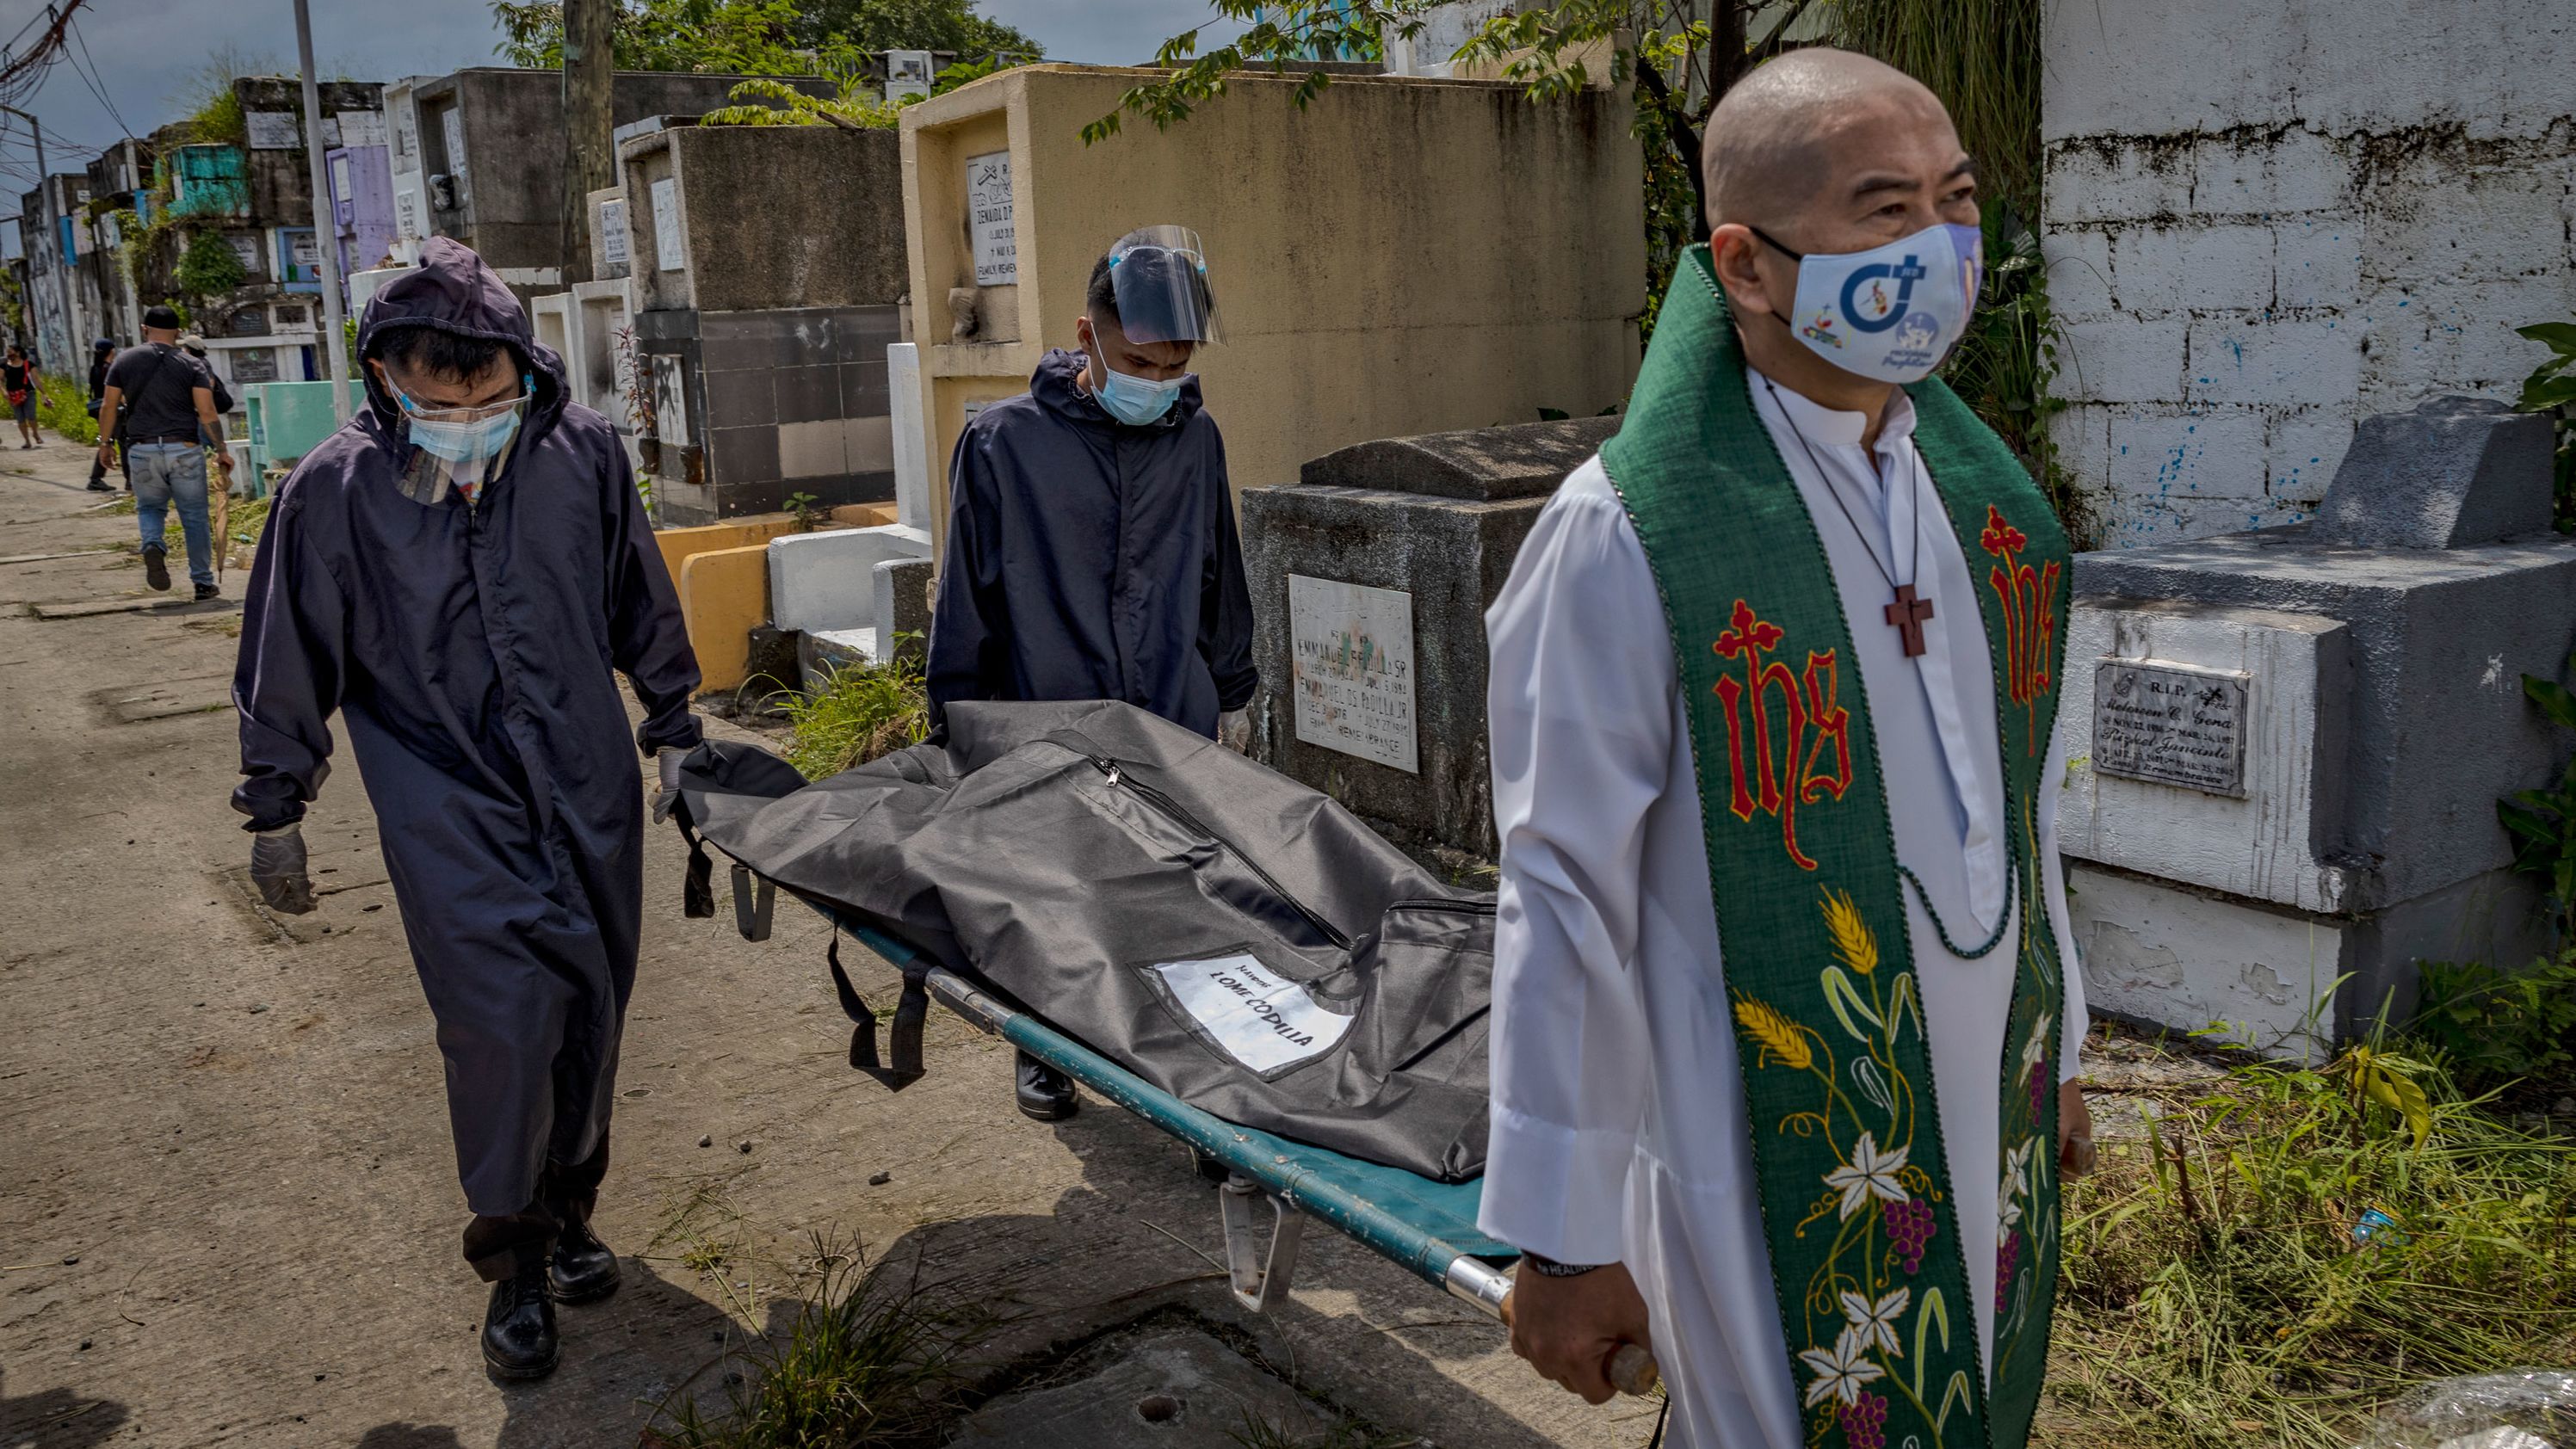 A  priest carries a body bag containing the remains of a victim of an alleged extrajudicial killing five years ago, which was exhumed after the lease on his tomb expired at a public cemetery on September 17 in Navotas, Metro Manila, Philippines.